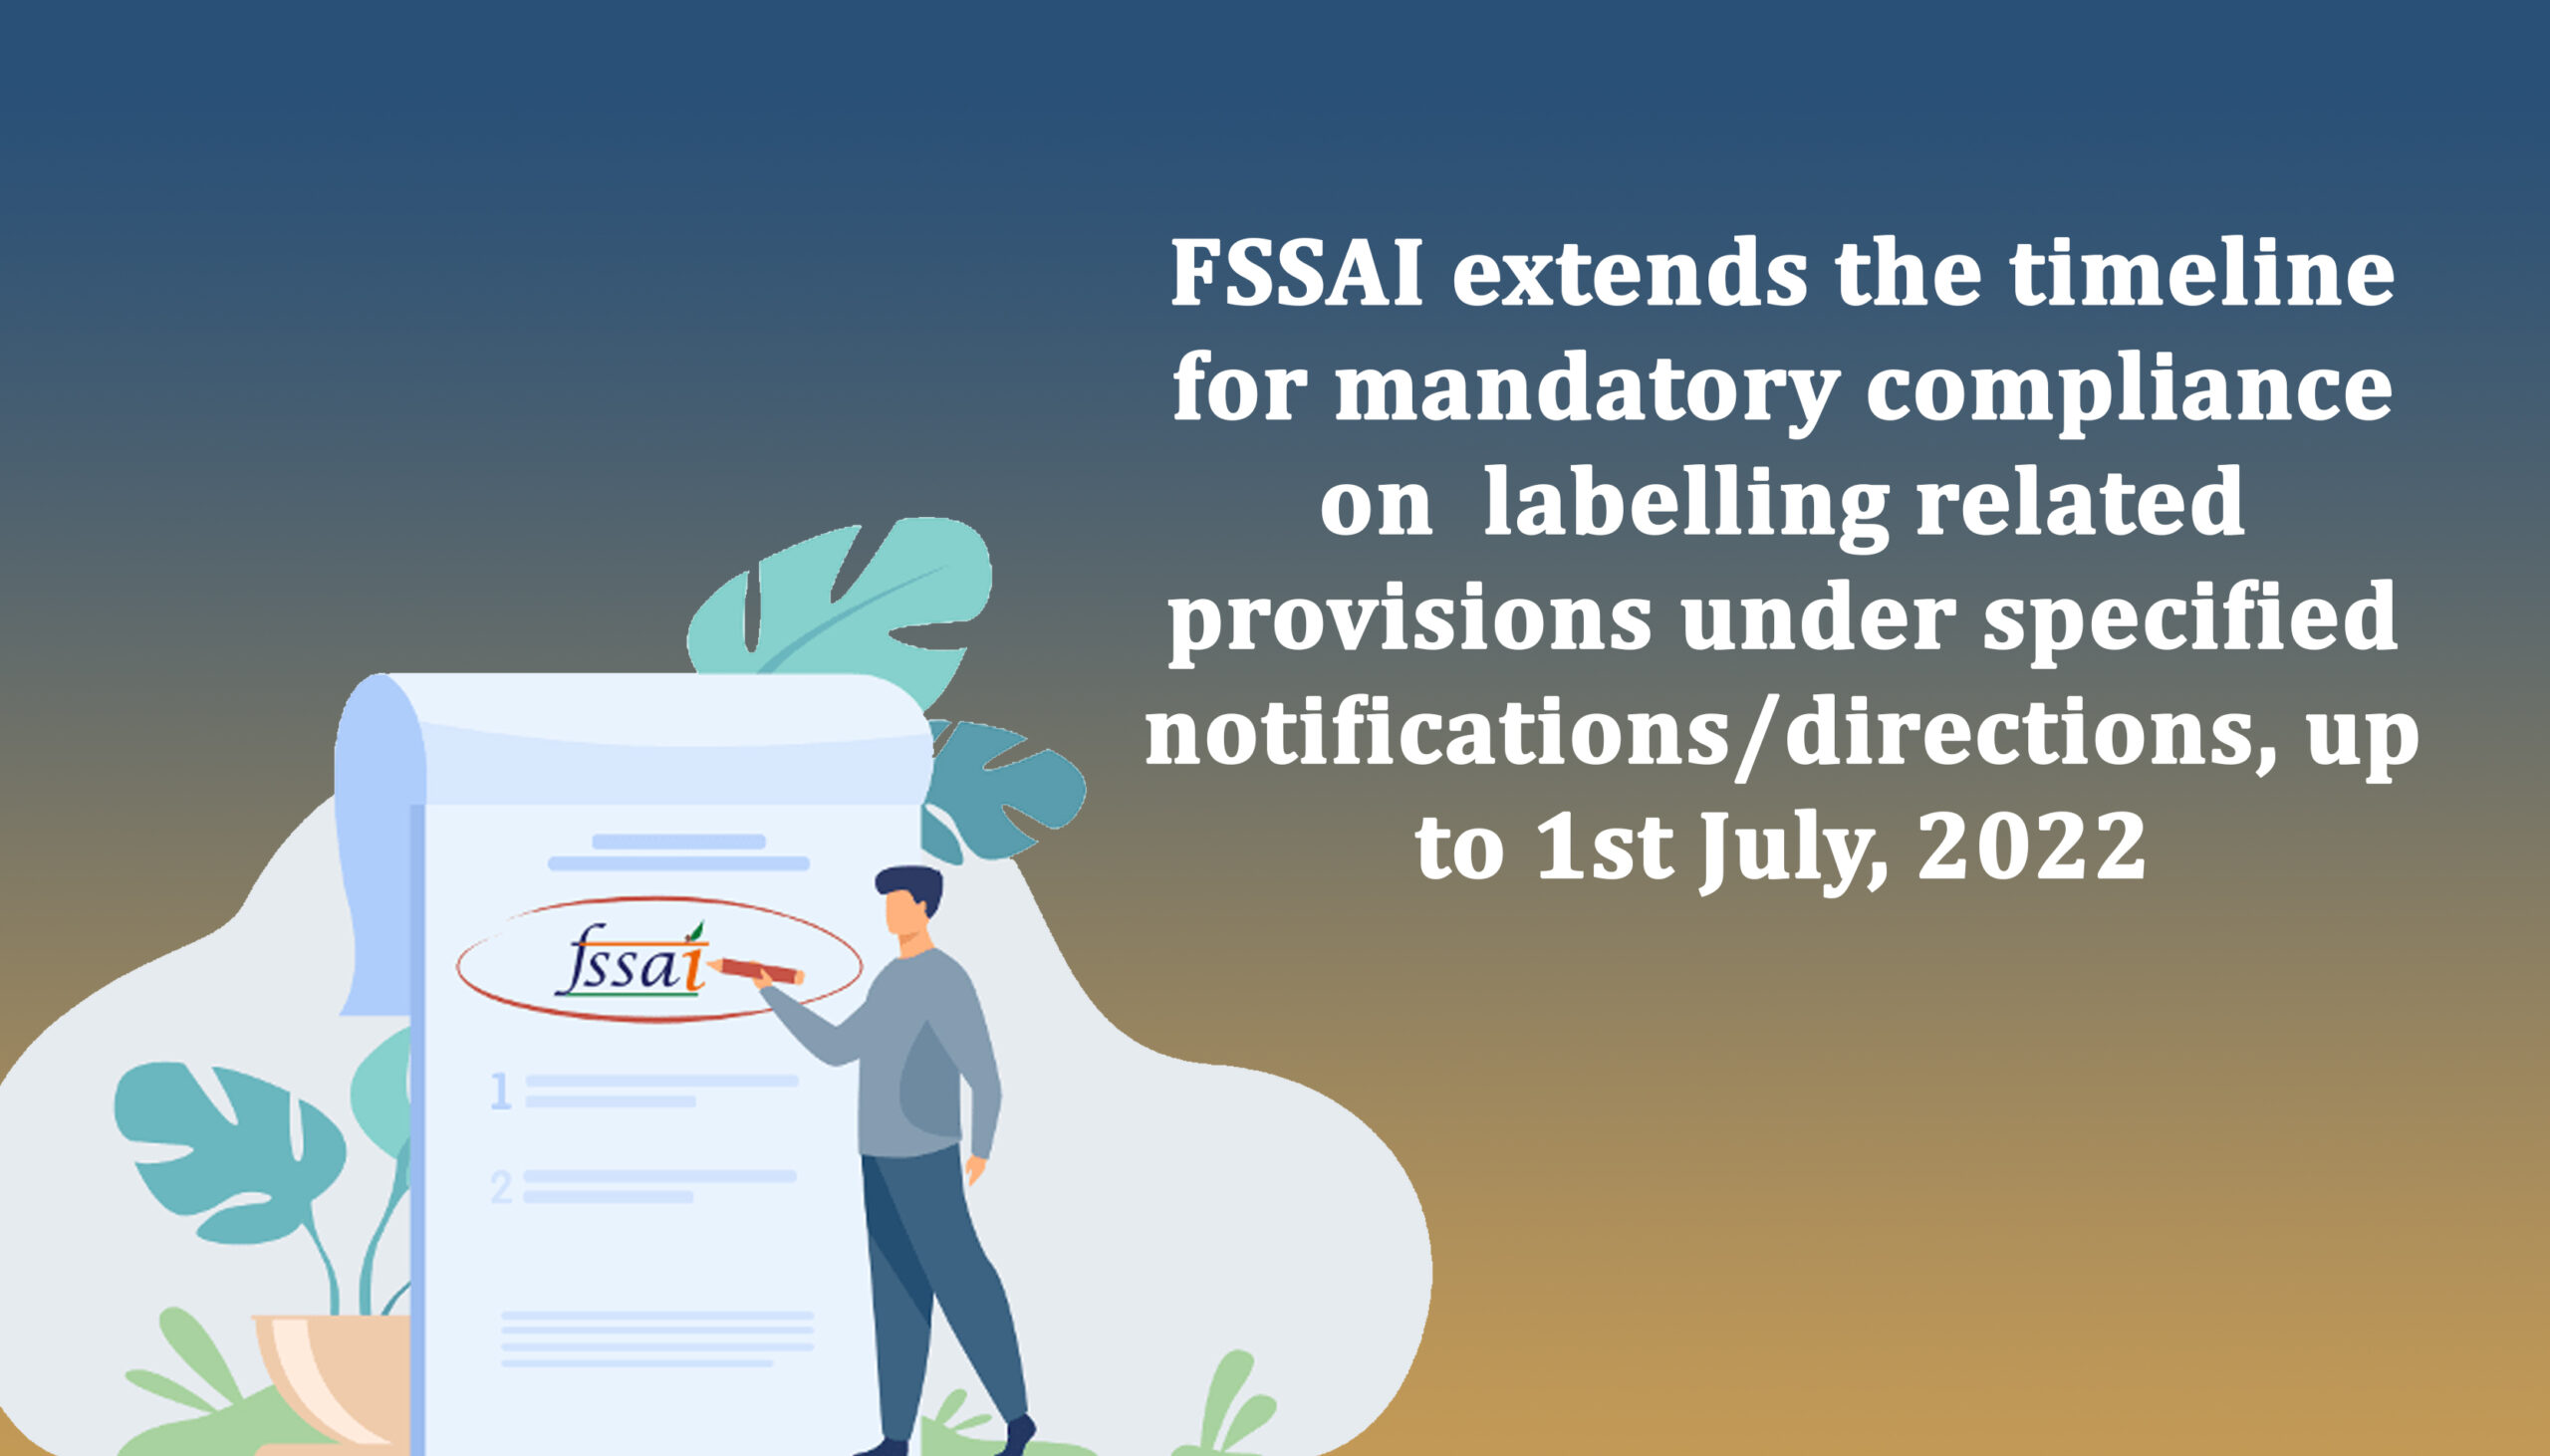 FSSAI extends the timeline for mandatory compliance on  labelling related provisions under specified notifications/directions, up to 1st July, 2022